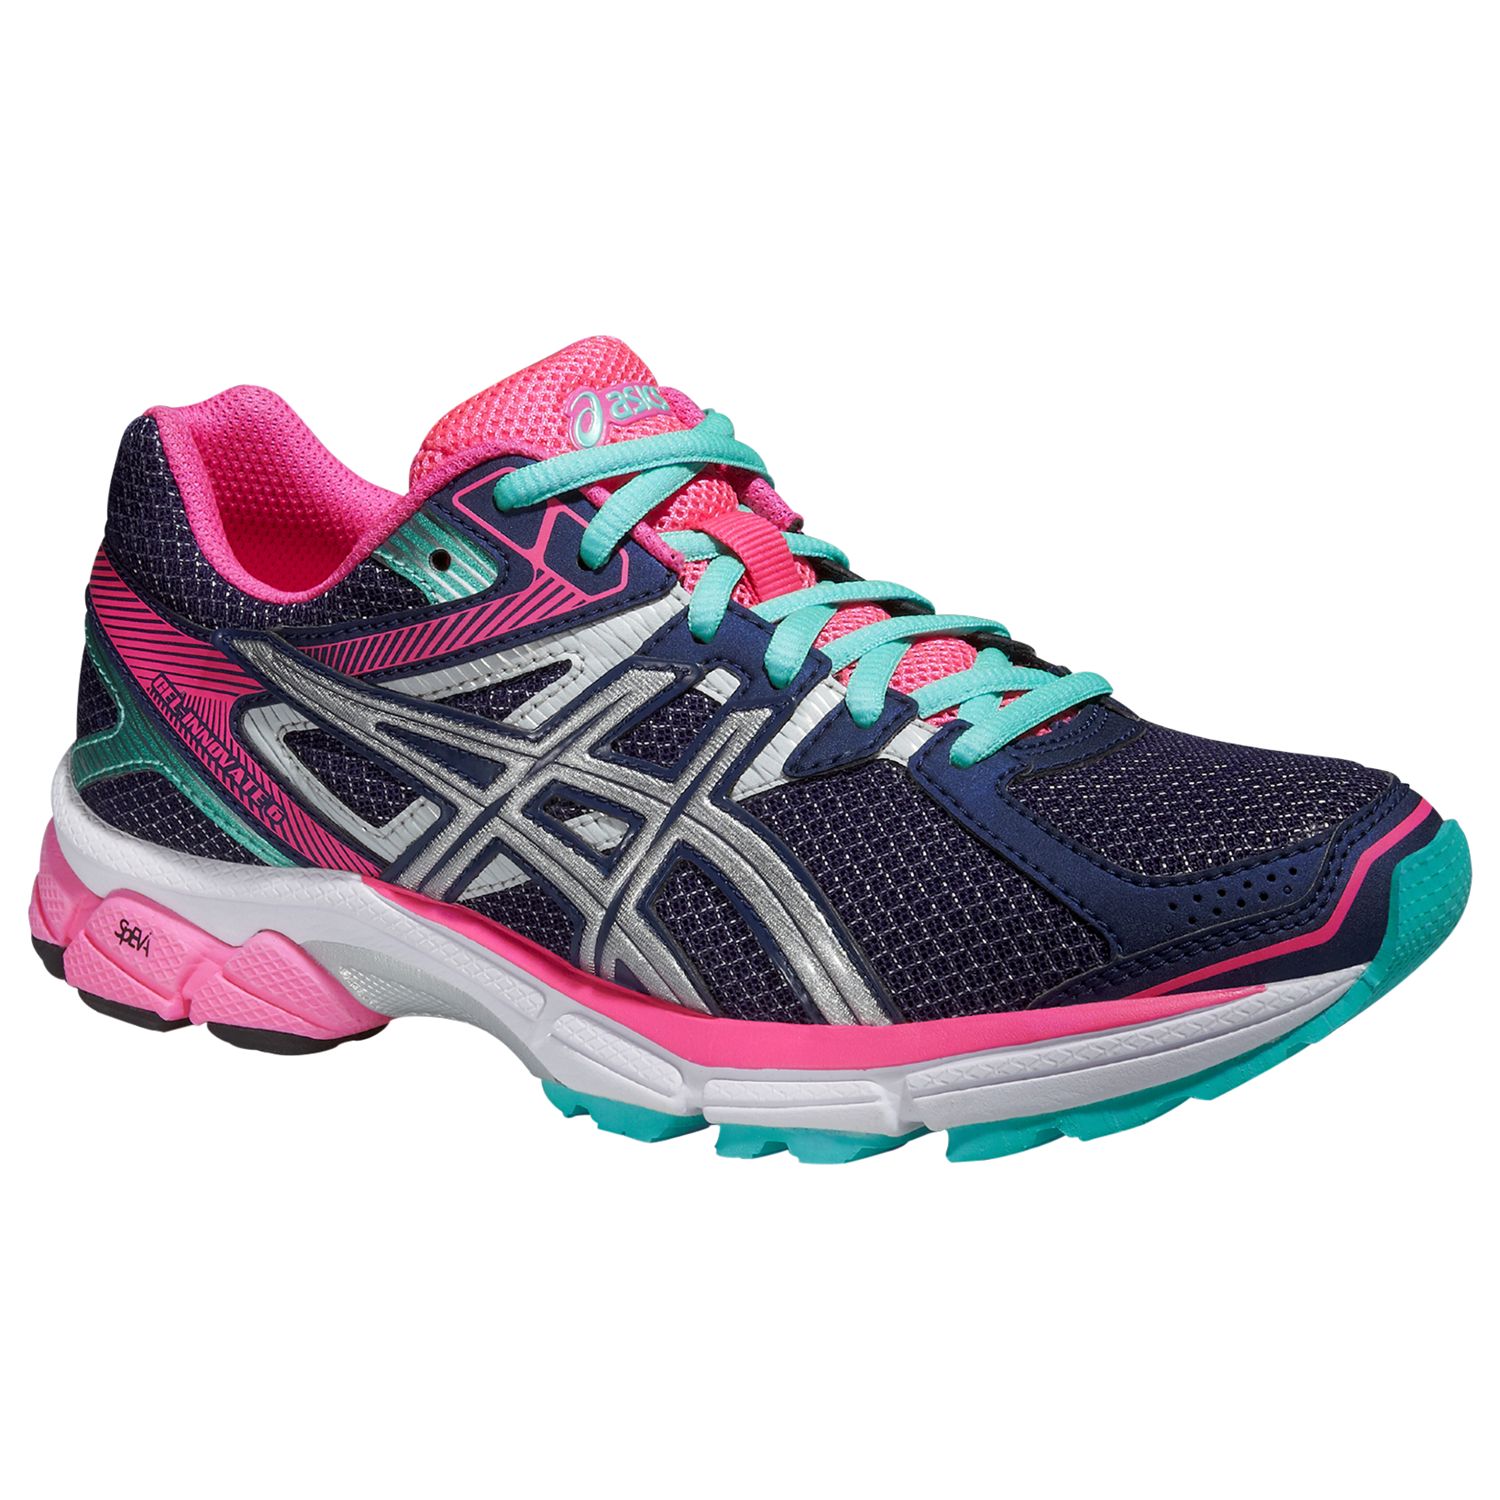 Asics Gel-Innovate 6 Women's Structured Shoes